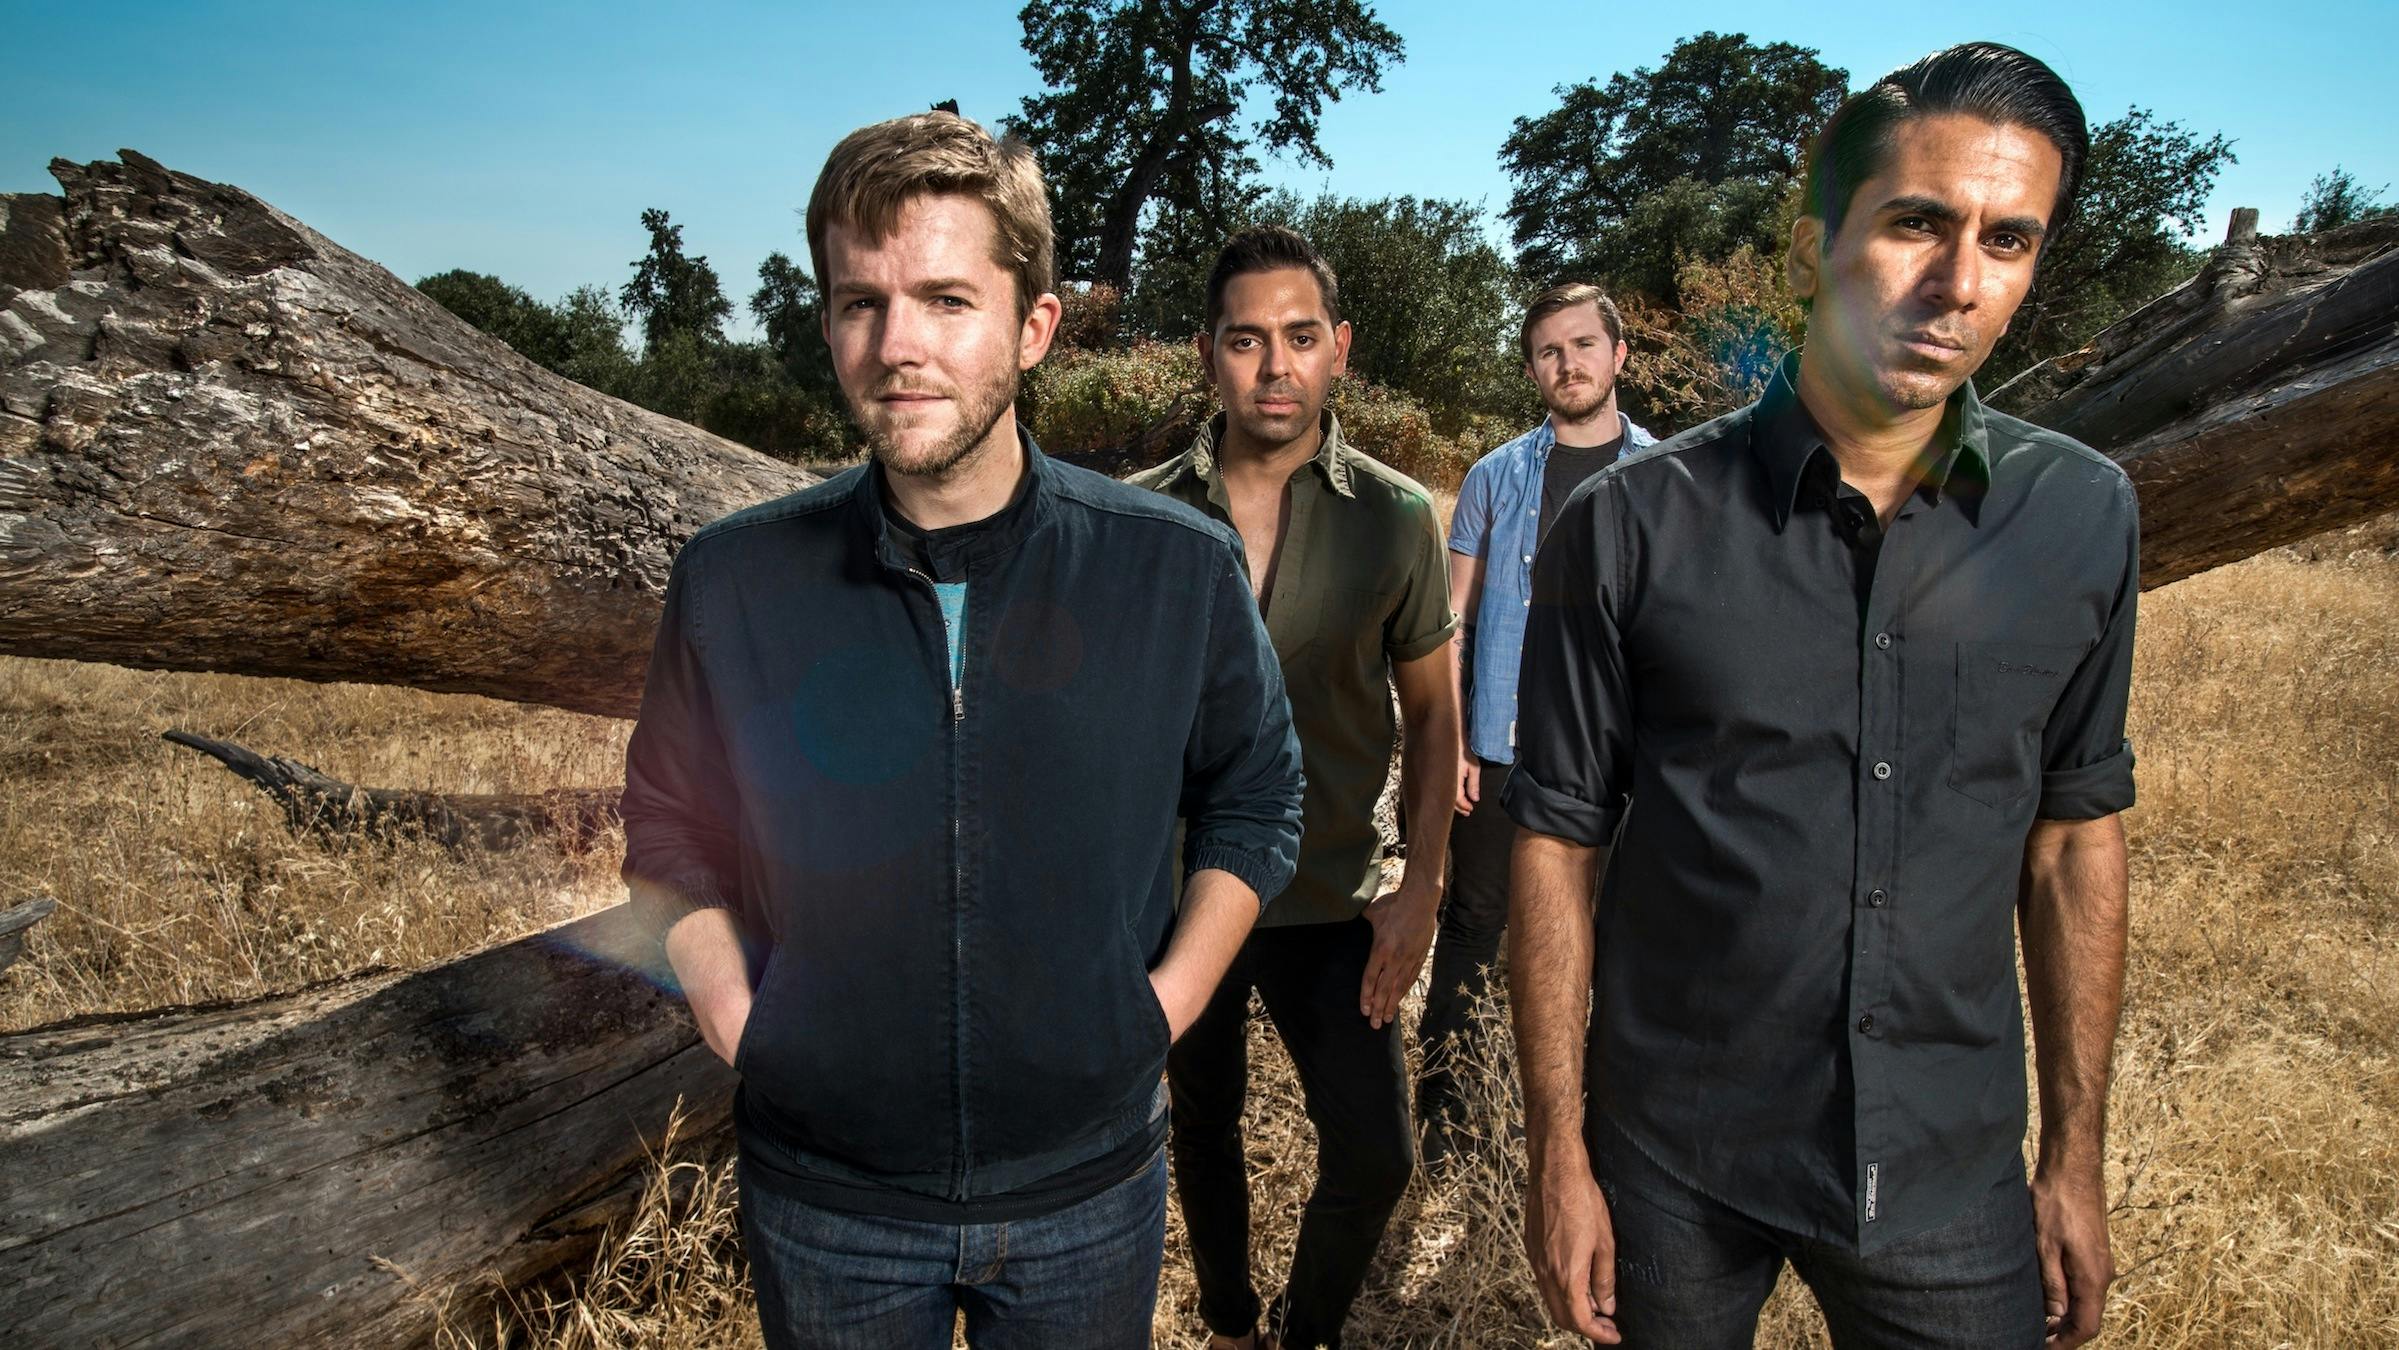 Saves The Day's Chris Conley On New Album: "It’s The Summation Of My Life Up To This Point"